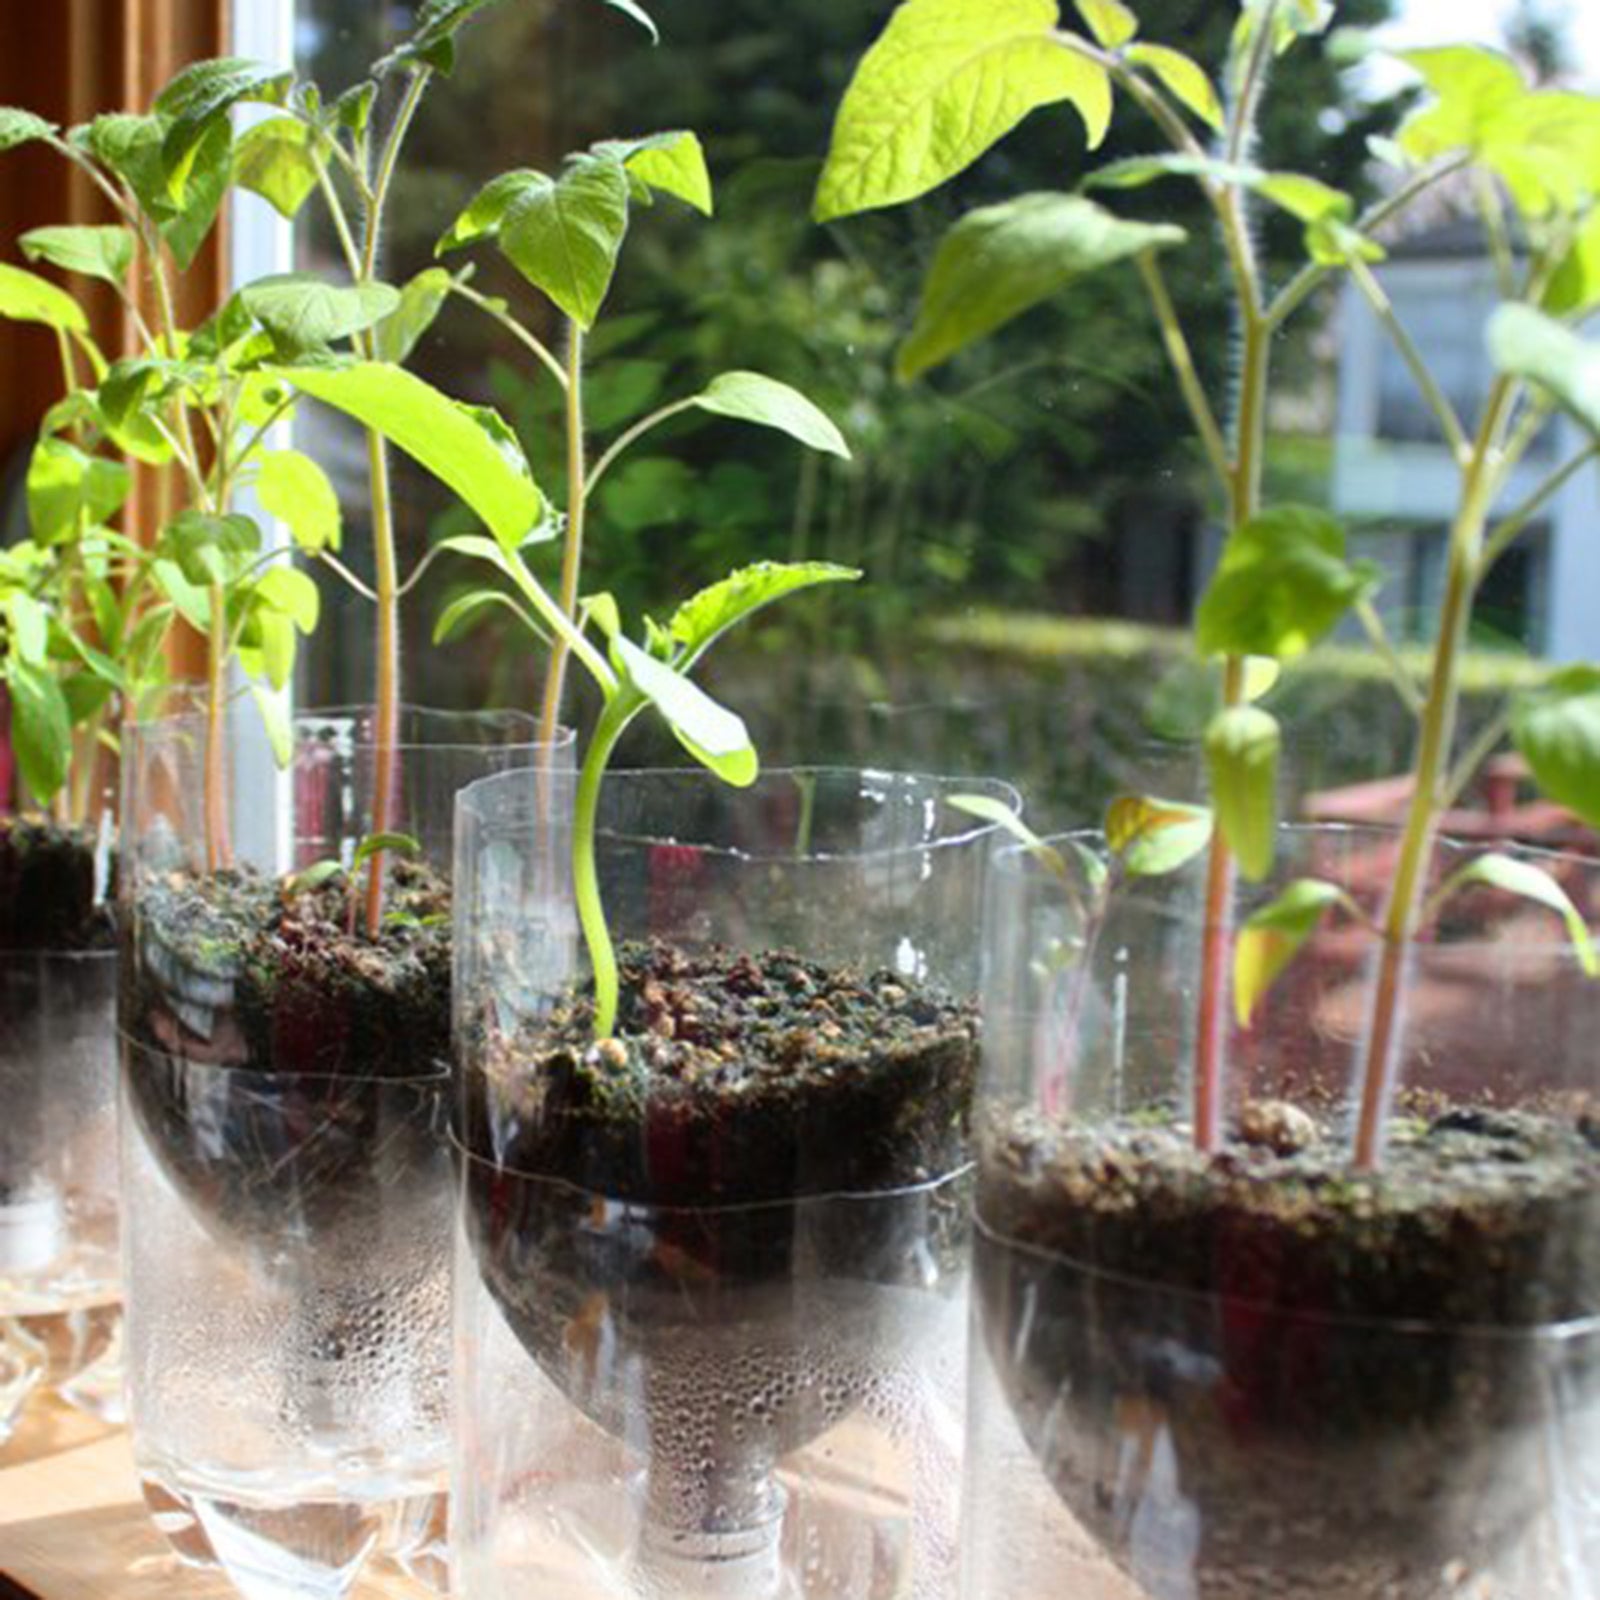 DIY Guide: Make Your Own Low-Waste Self-Watering Seed Starter Pots